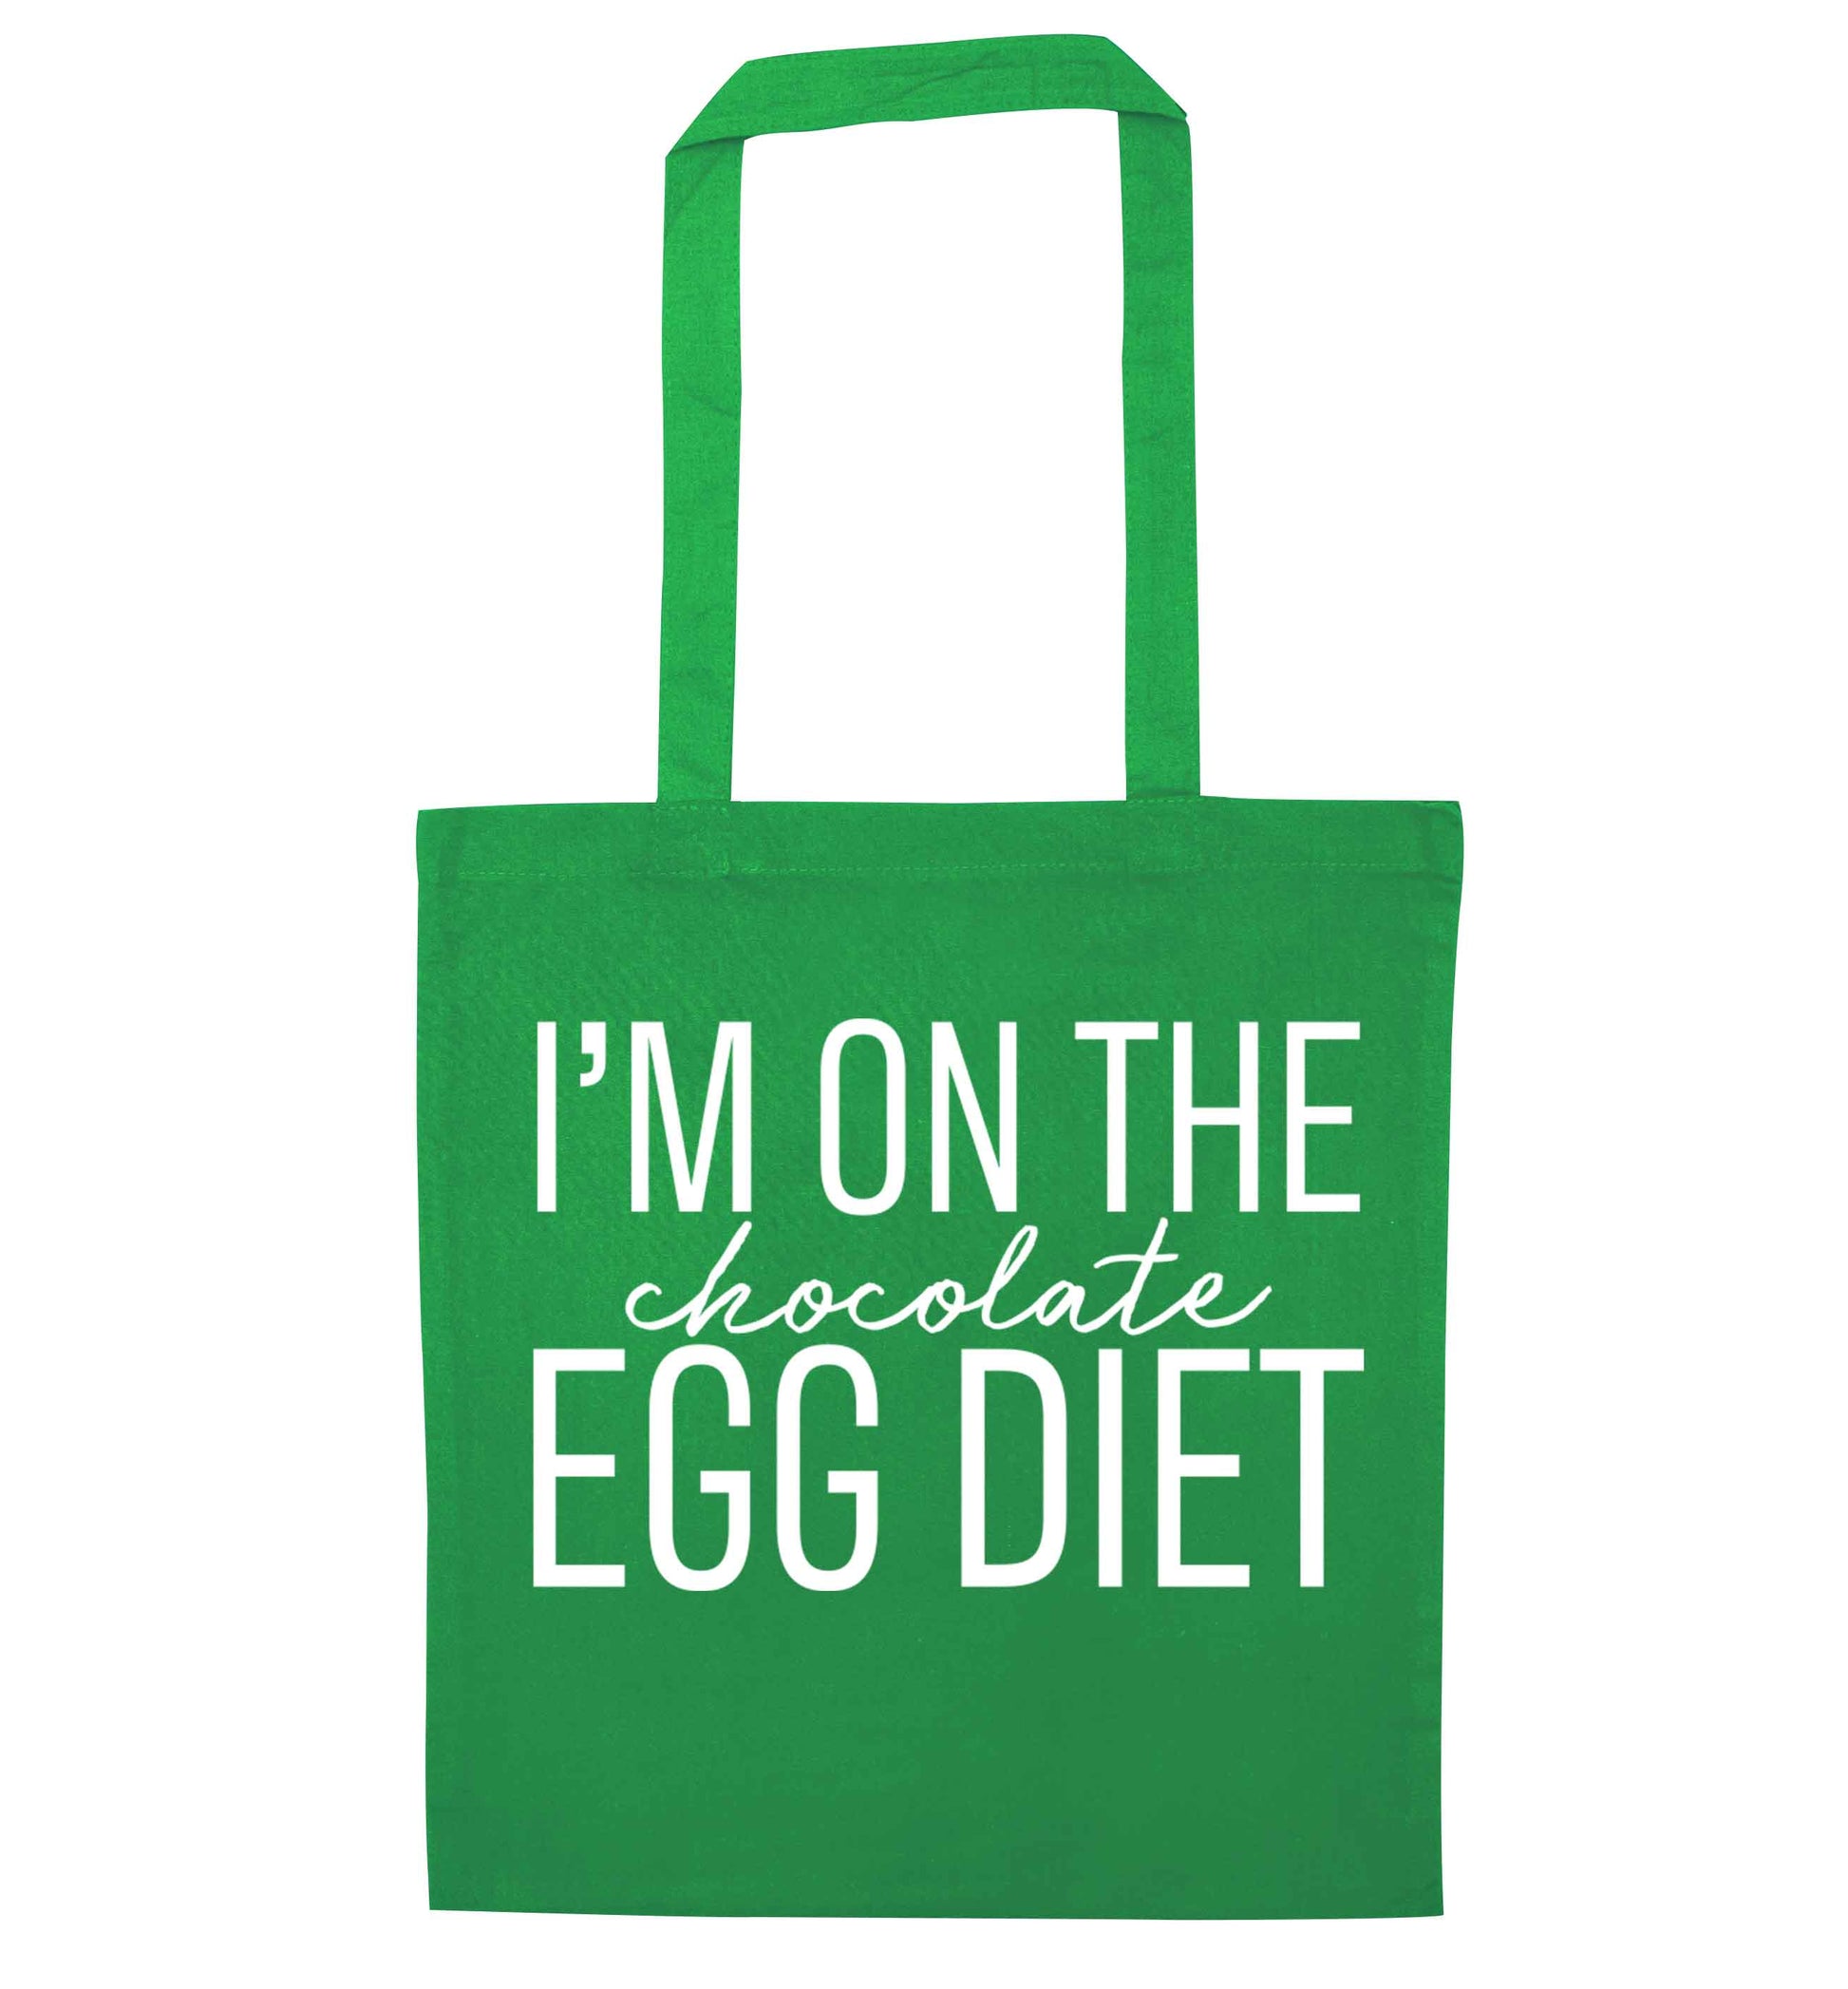 I'm on the chocolate egg diet green tote bag